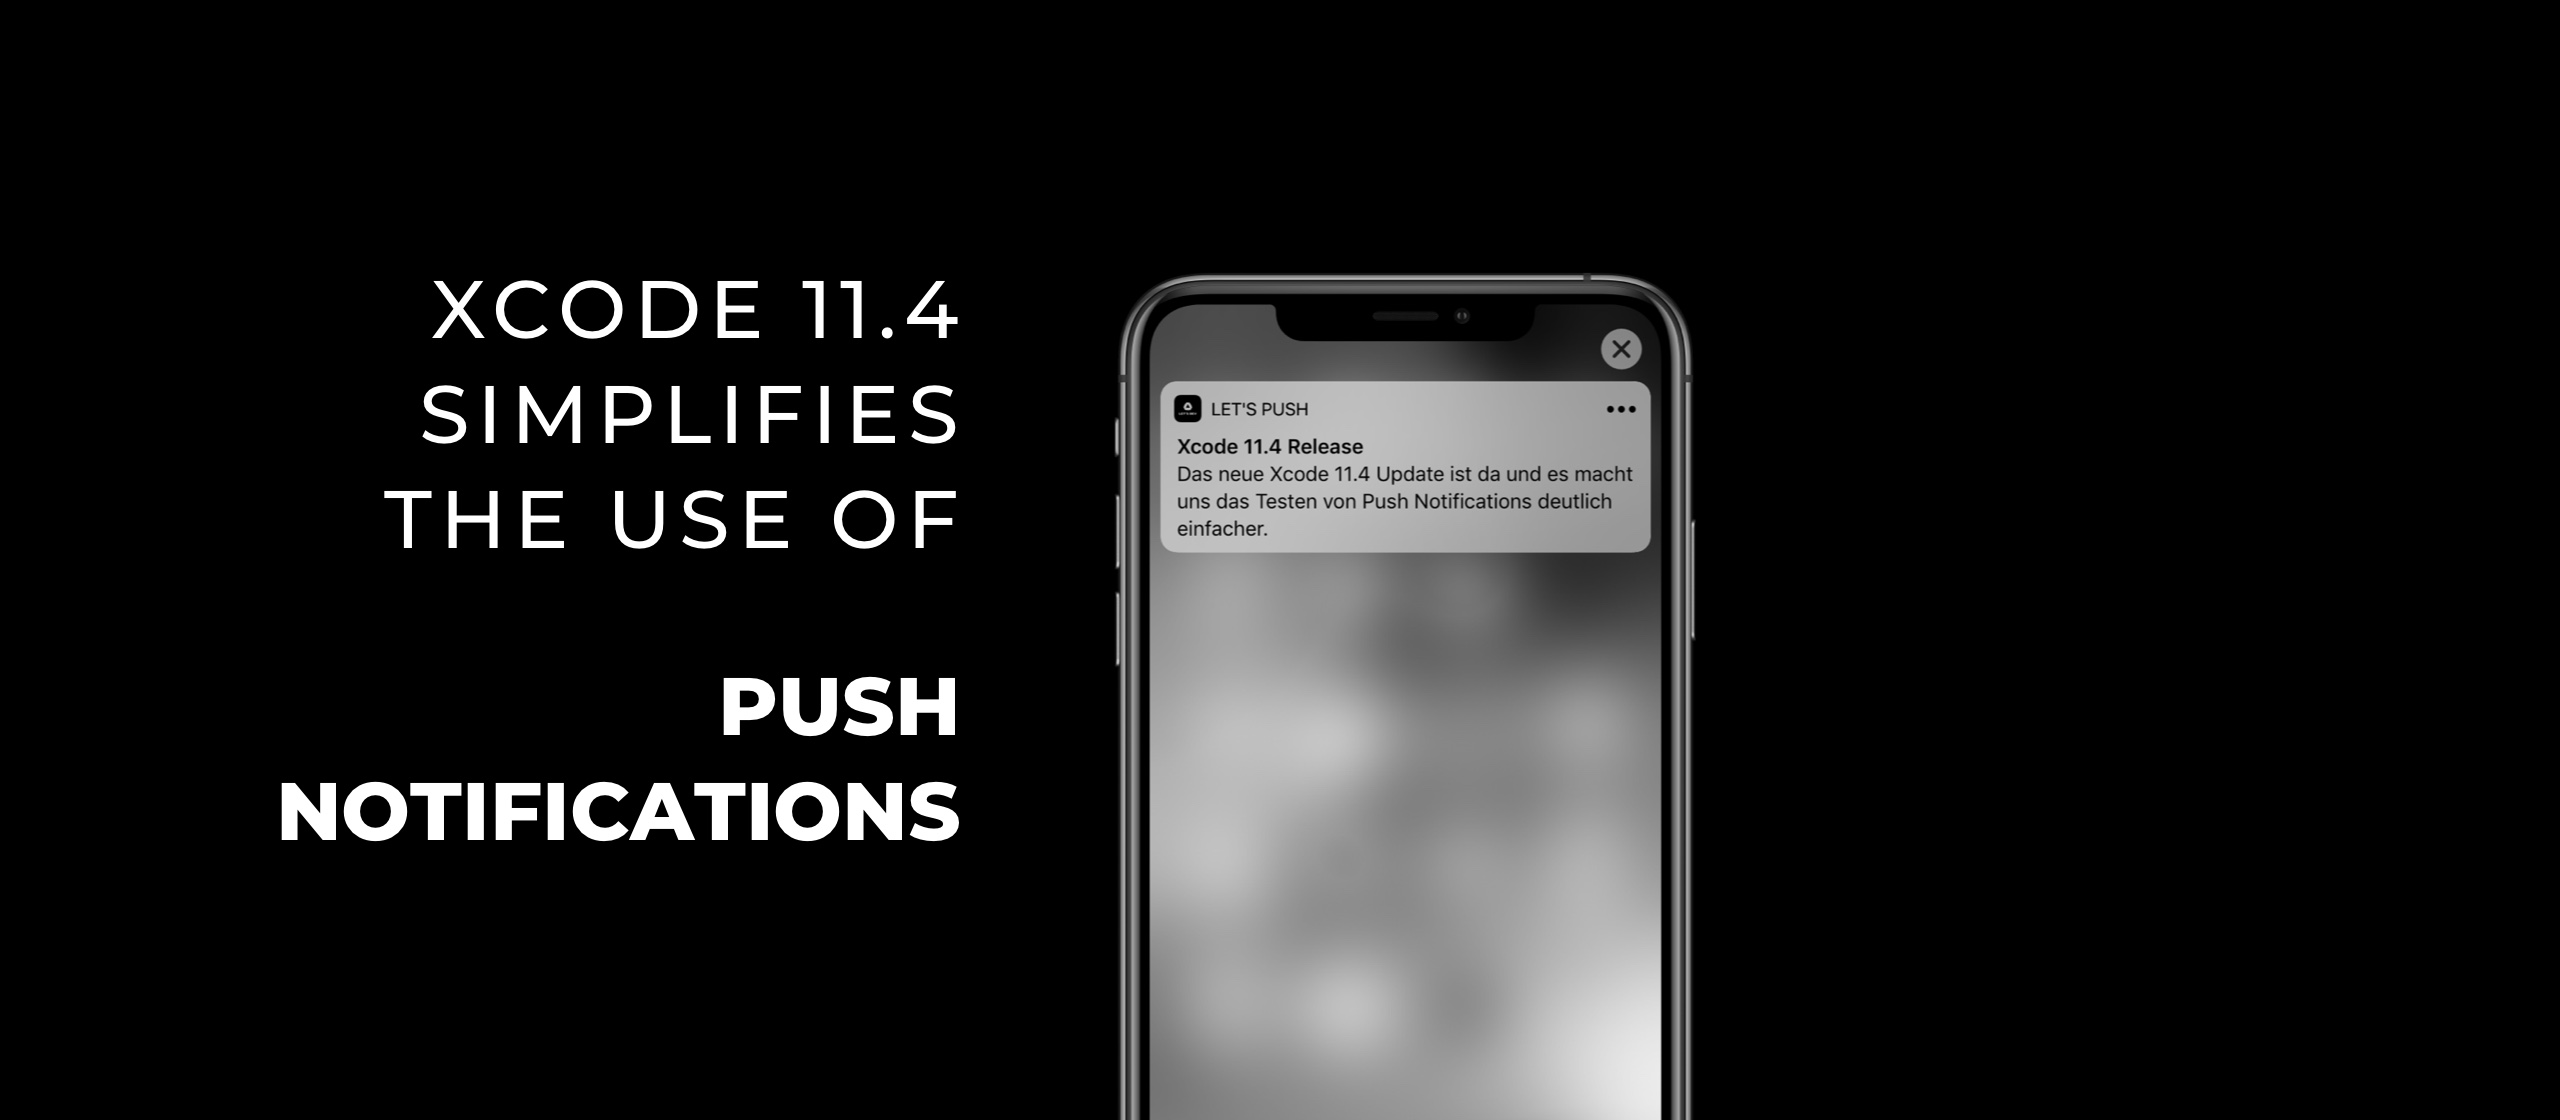 let’s dev Blog | Simplified testing of iOS push notifications in the simulator with Xcode 11.4